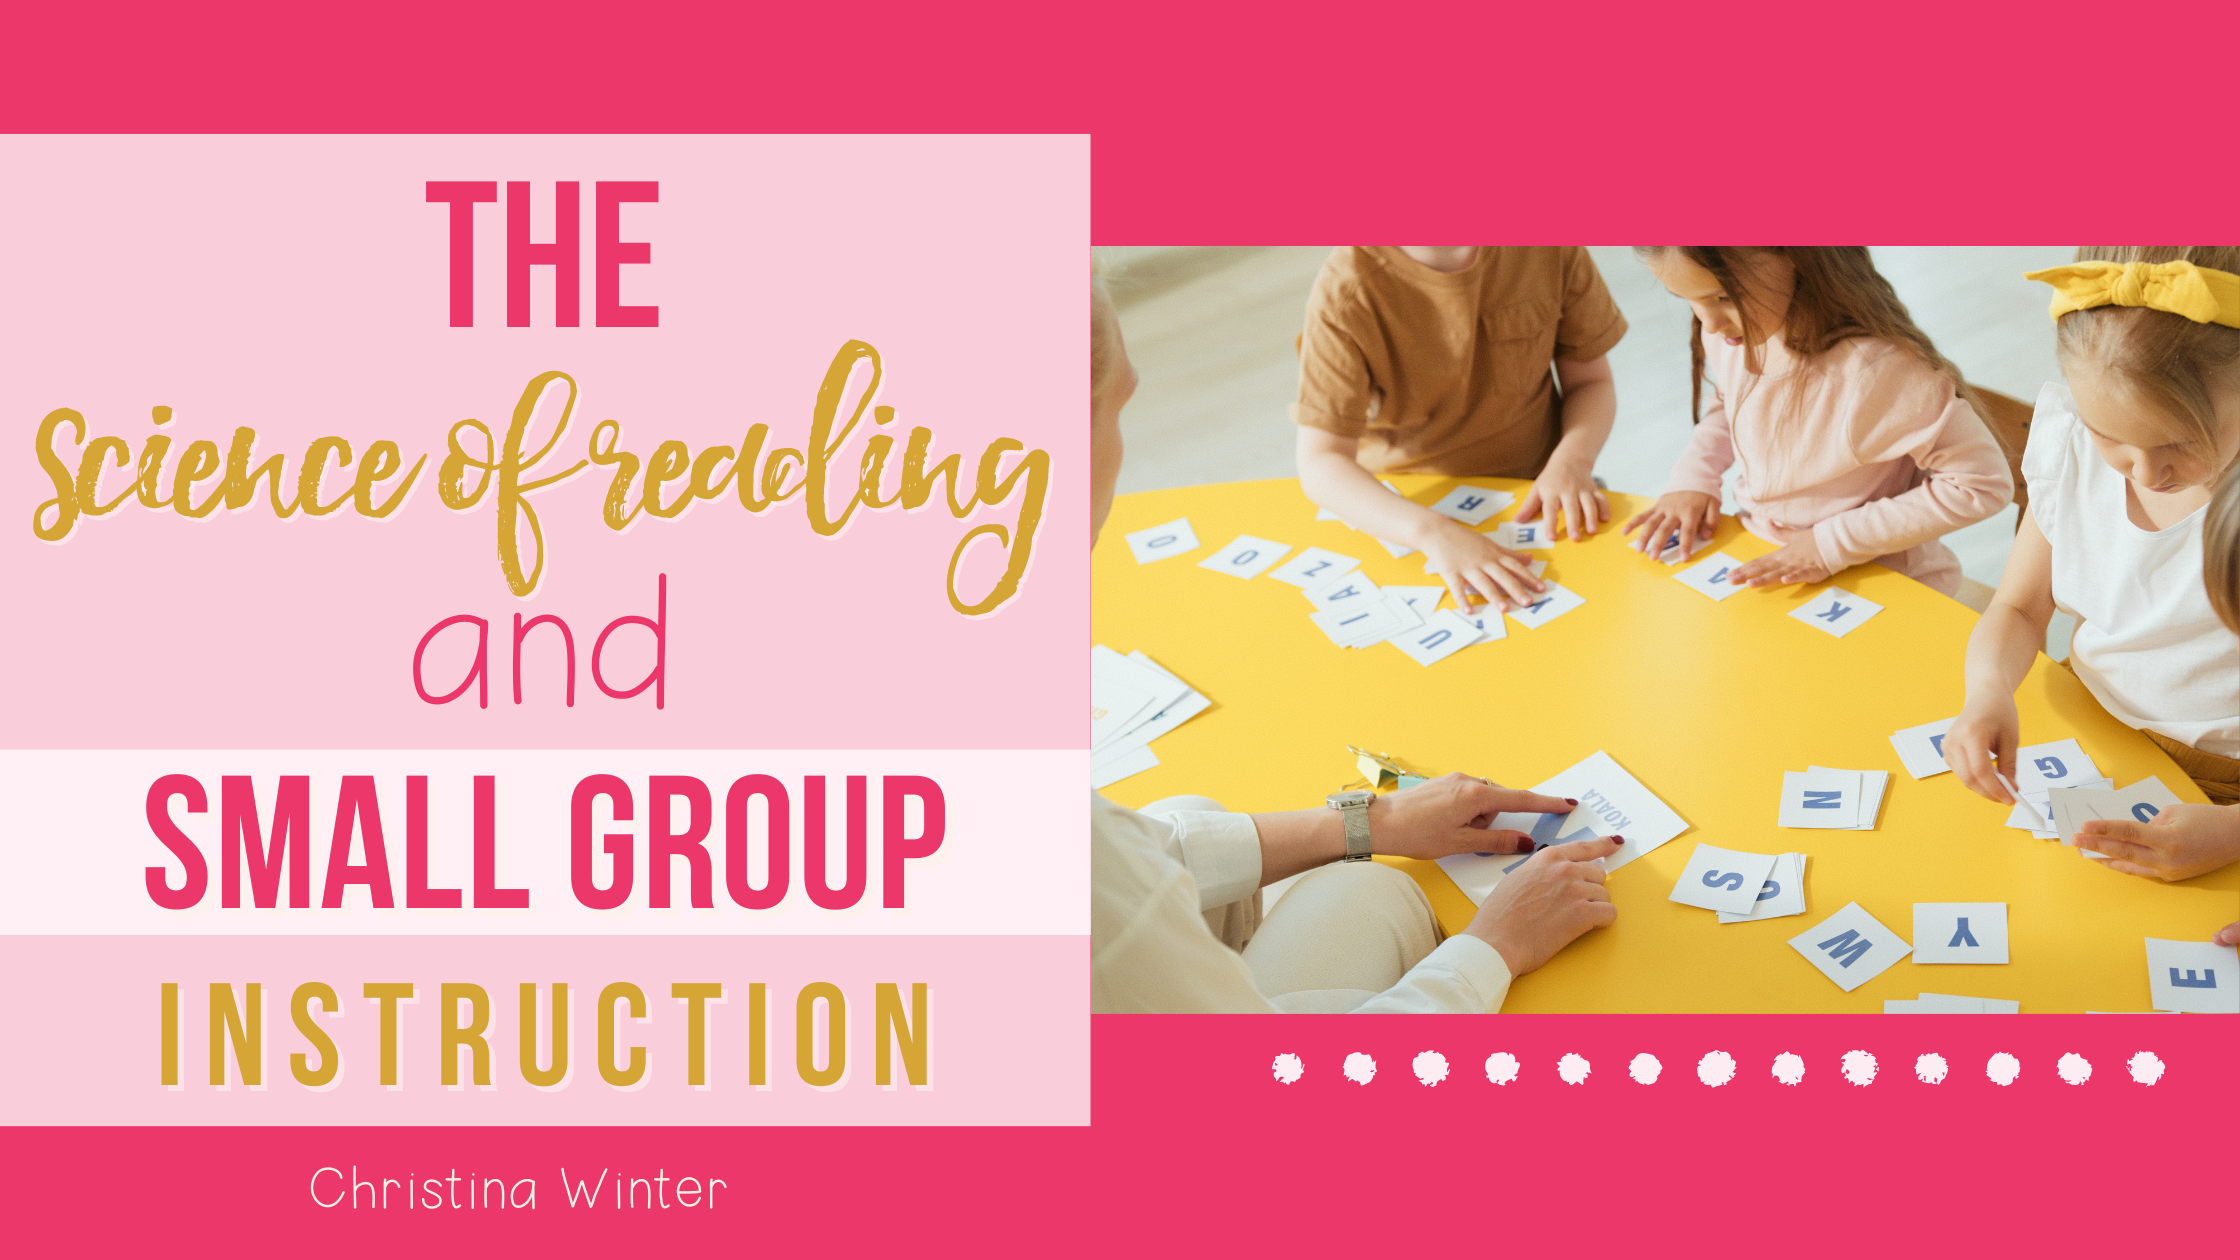 The Science of Reading and Small Group Instruction